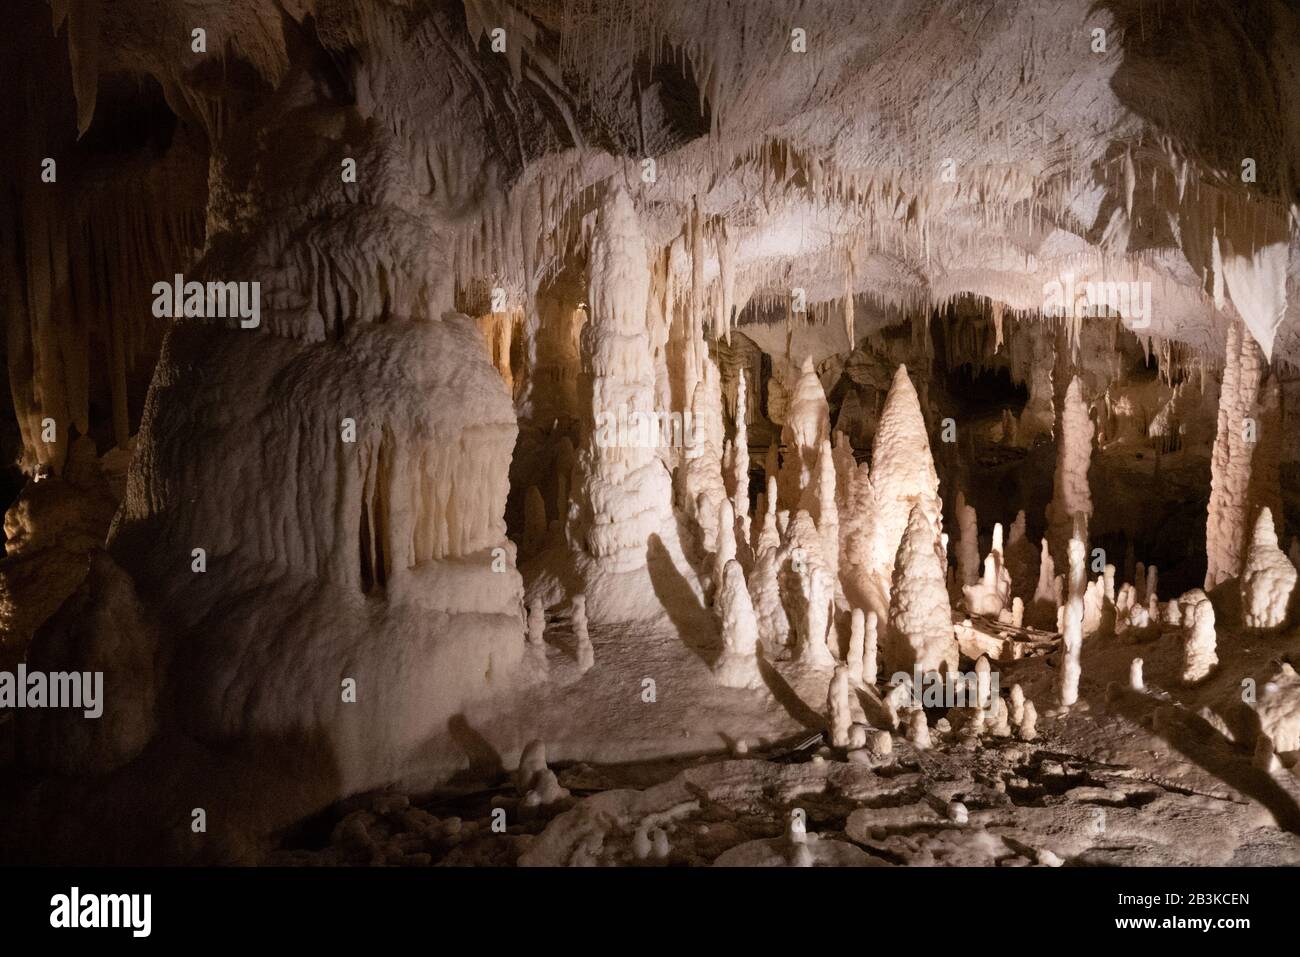 Italy, Marche, Genga, the natural show of Frasassi Caves with sharp stalactites and stalagmites Stock Photo